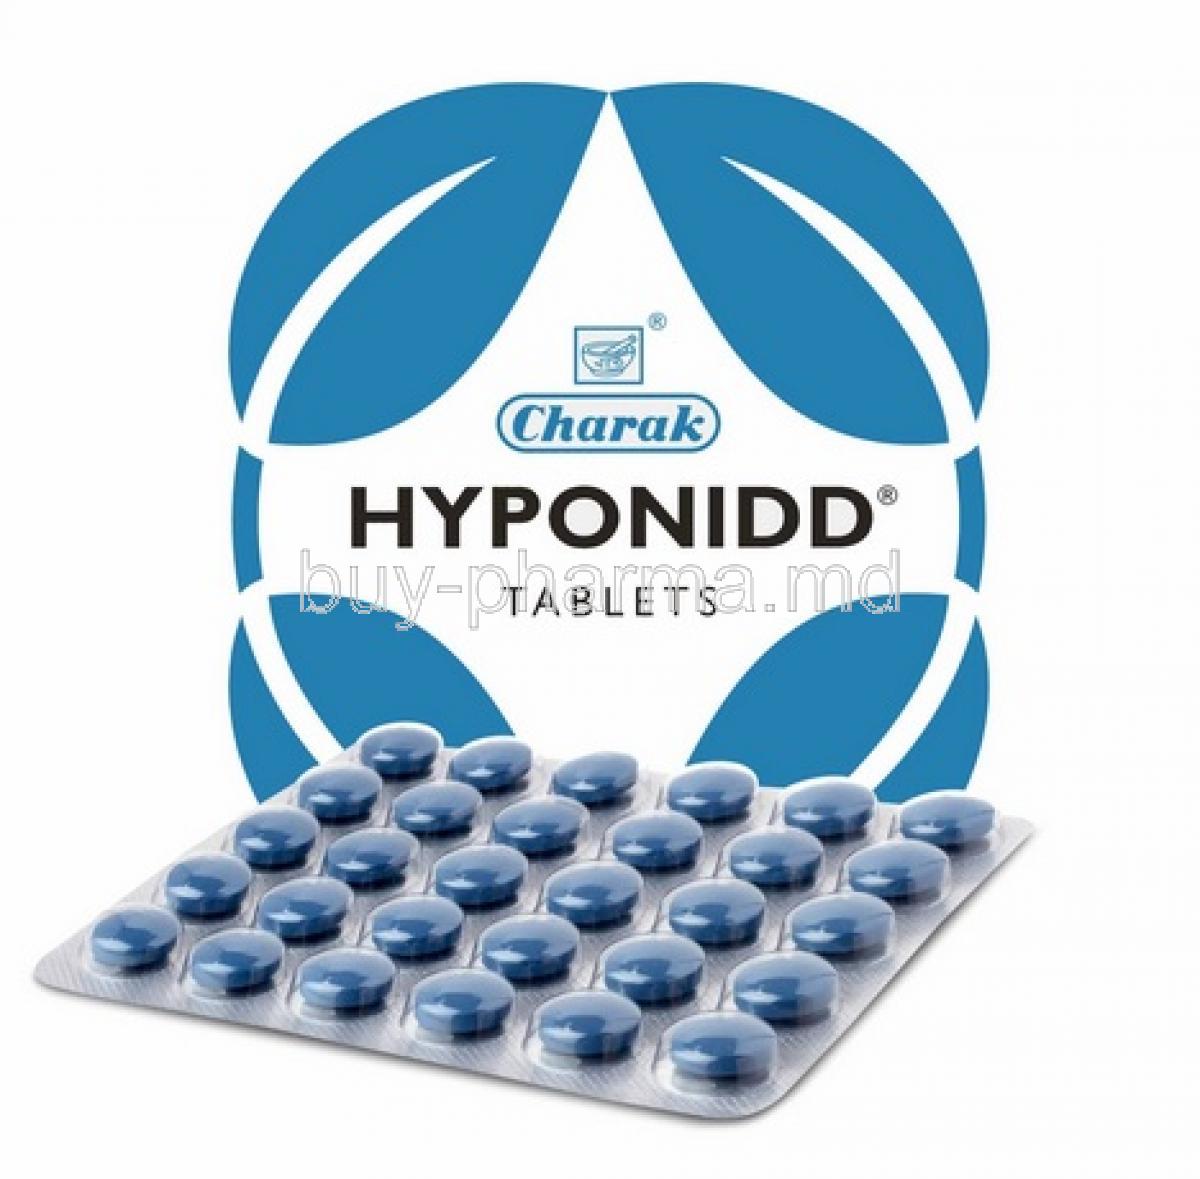 Hyponidd box and tablets